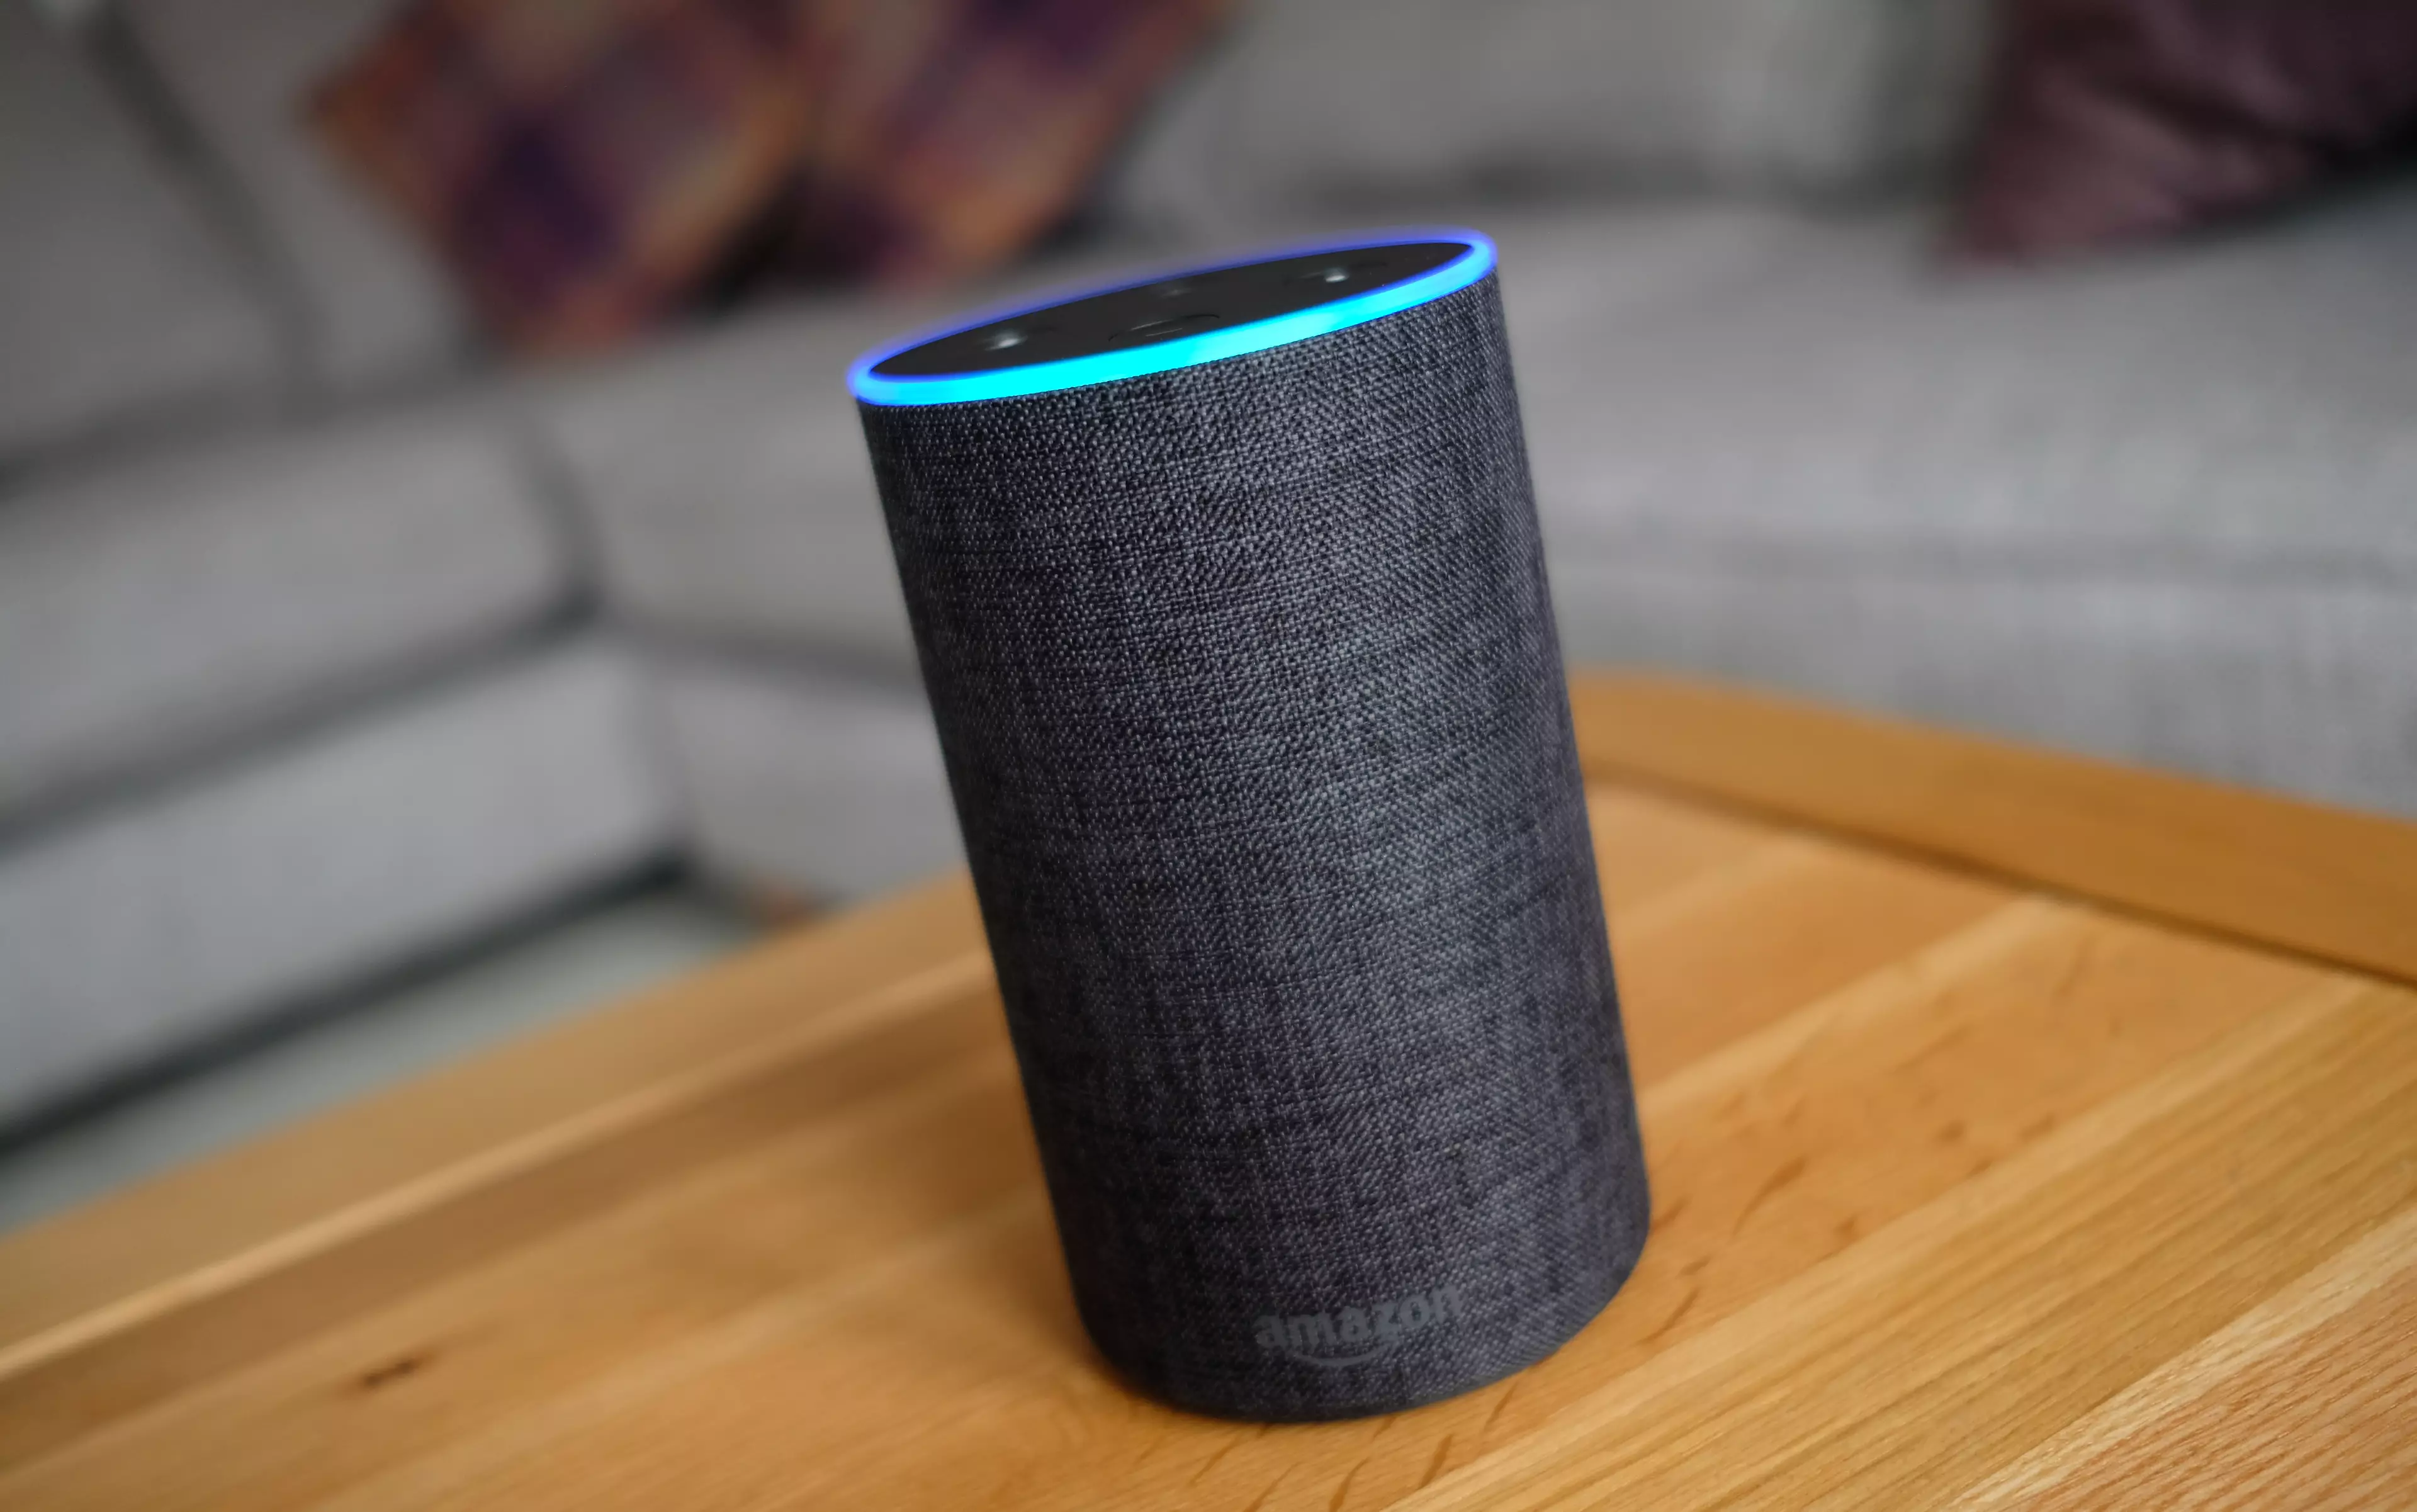 The Amazon Alexa is set to get a number of new 'voices'.